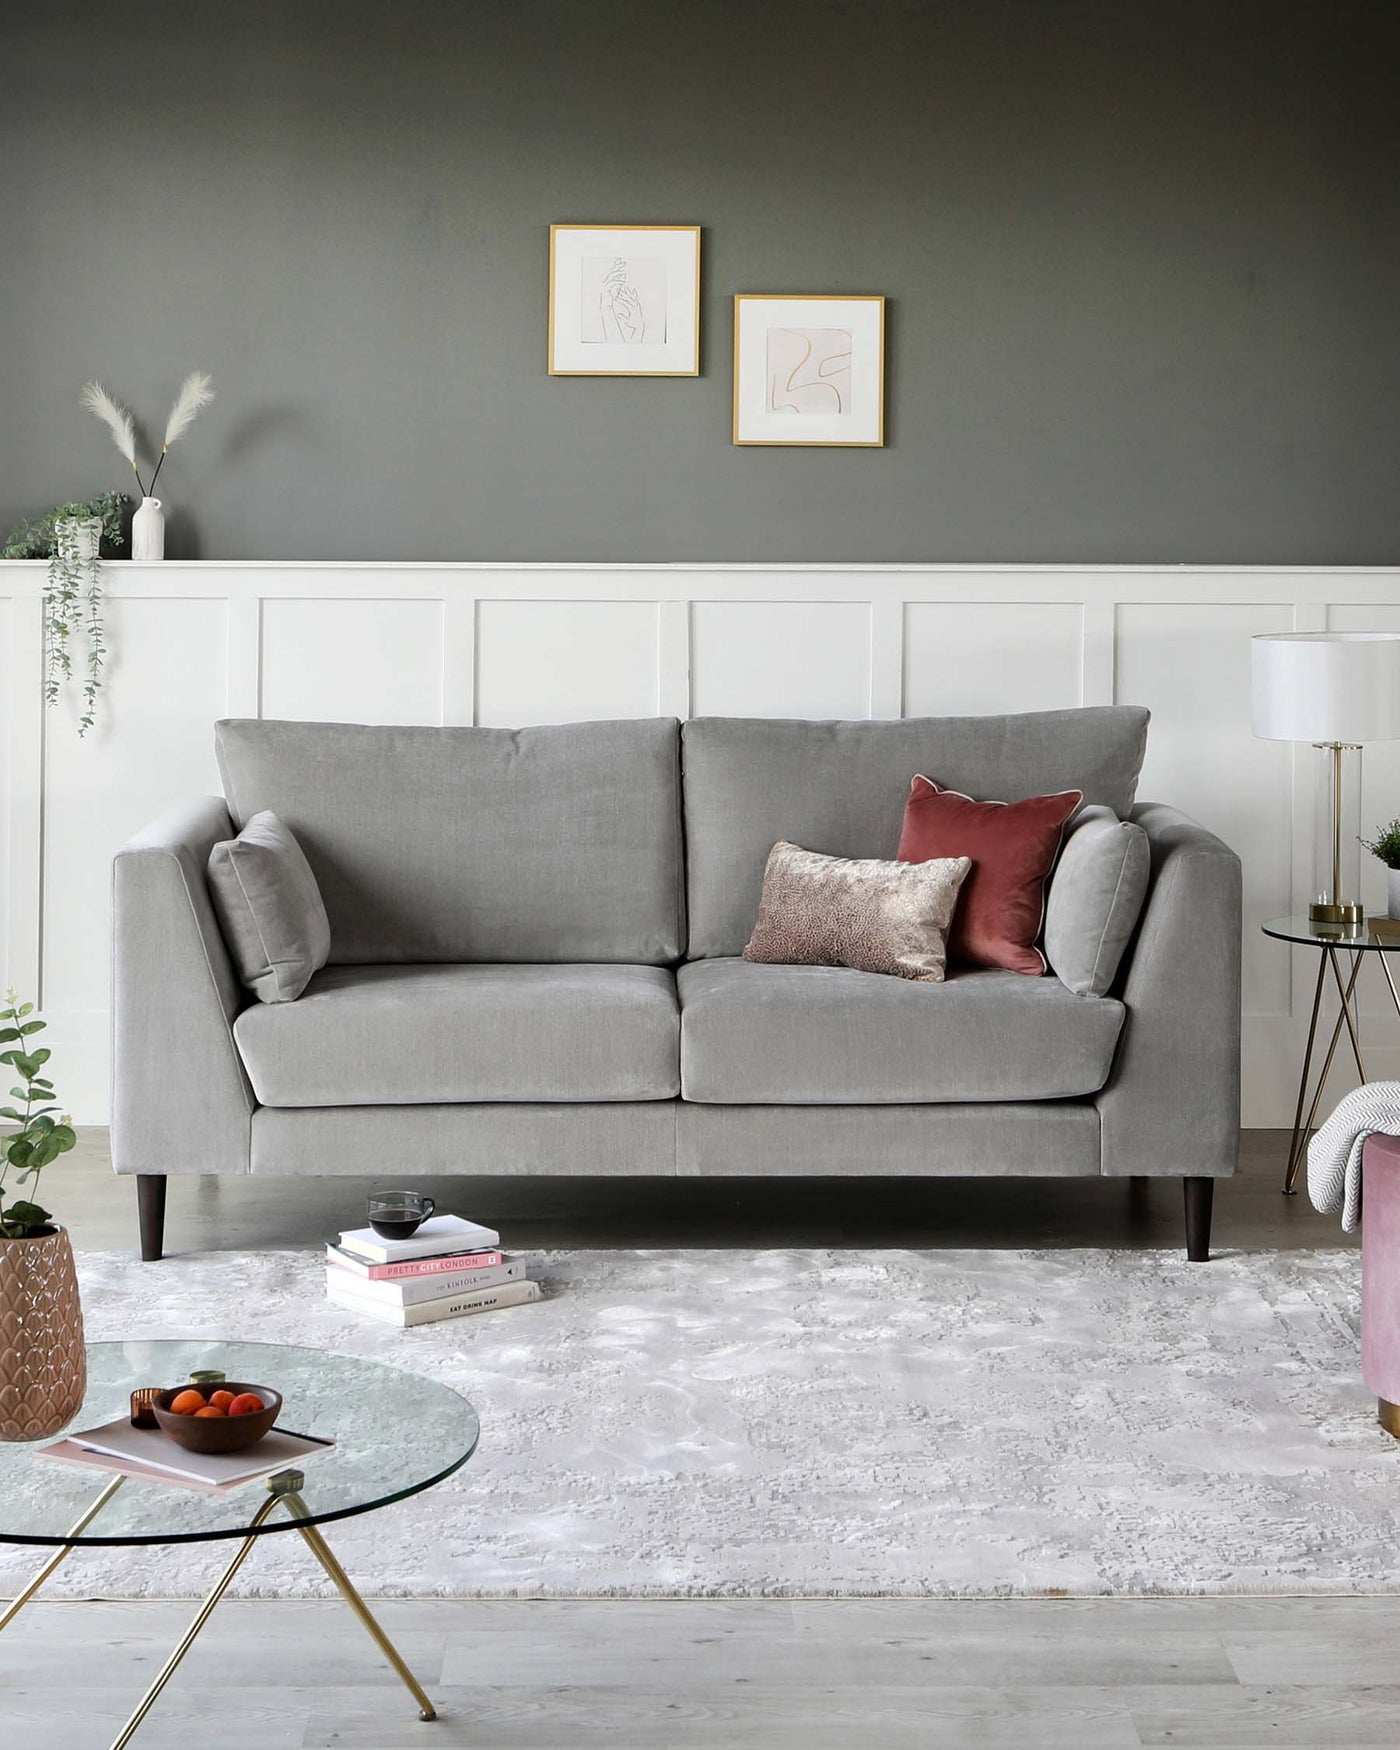 A modern light grey three-seater sofa with plush cushions and clean lines, paired with a round glass-top coffee table with gold cross-frame legs. A white lamp with a gold base sits atop a small round side table with a marble surface. These pieces are staged on a textured white area rug, with decorative elements including a plant in a pink vase and a small stack of books to complete the contemporary living space aesthetics.